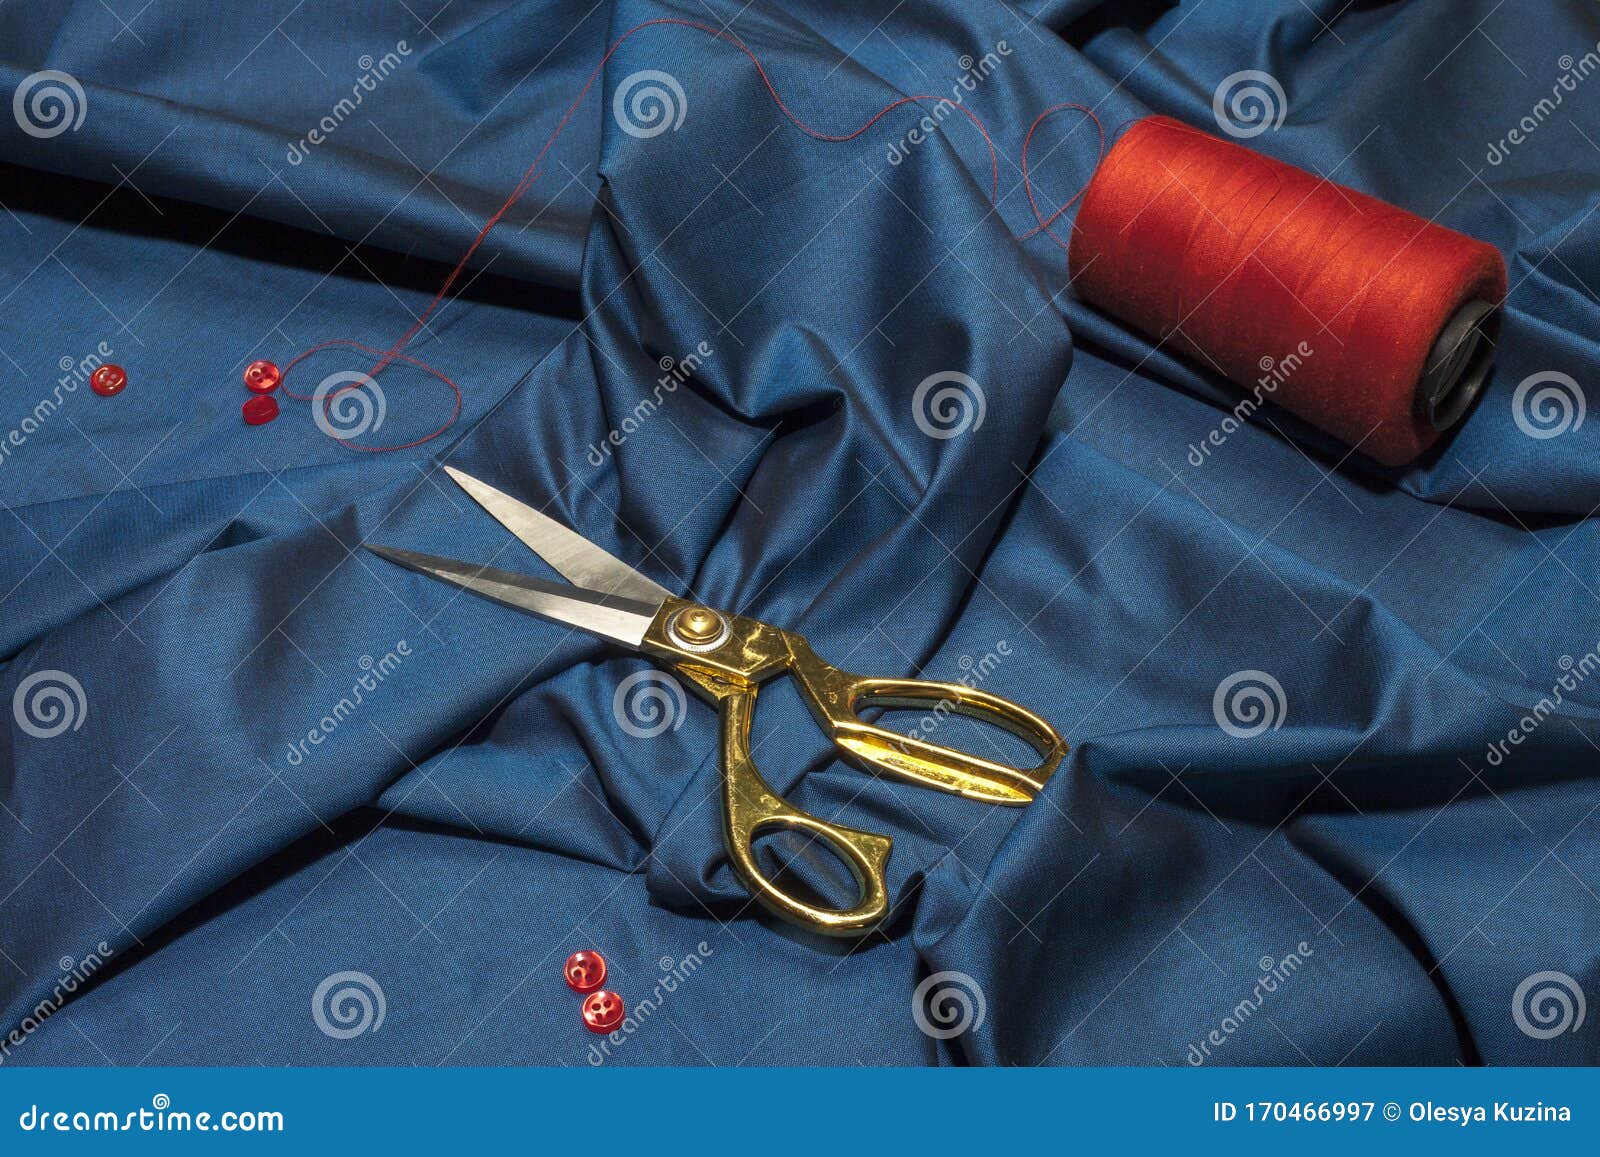 Fabric for Sewing Clothes. Items for Sewing Clothes Stock Photo - Image of  folded, blue: 170466776